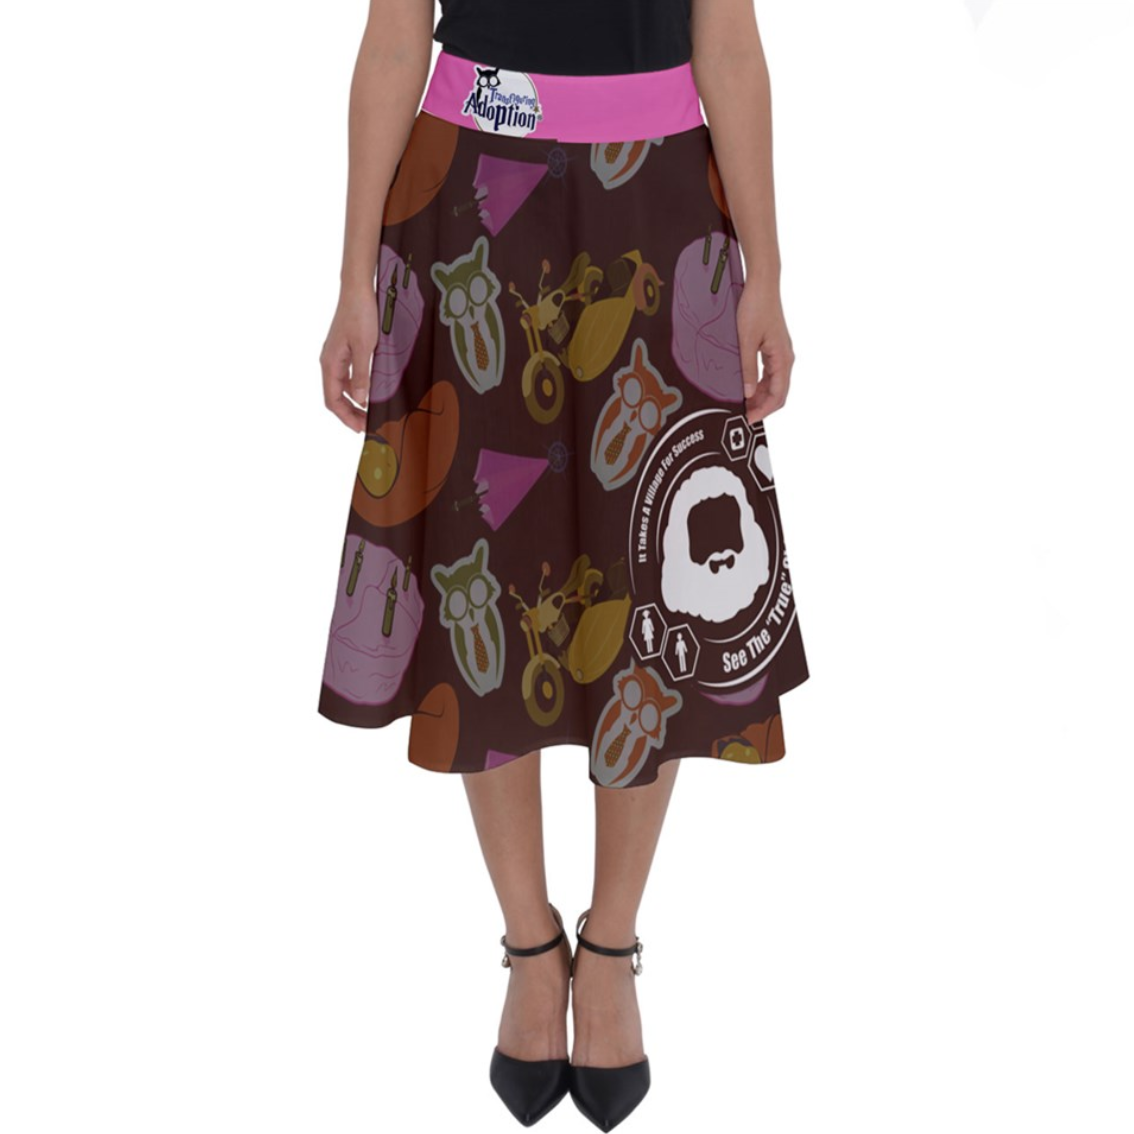 See The "TRUE" Child Perfect Length Midi Skirt (Patterned) - Inspired by Literary Character, Hagrid